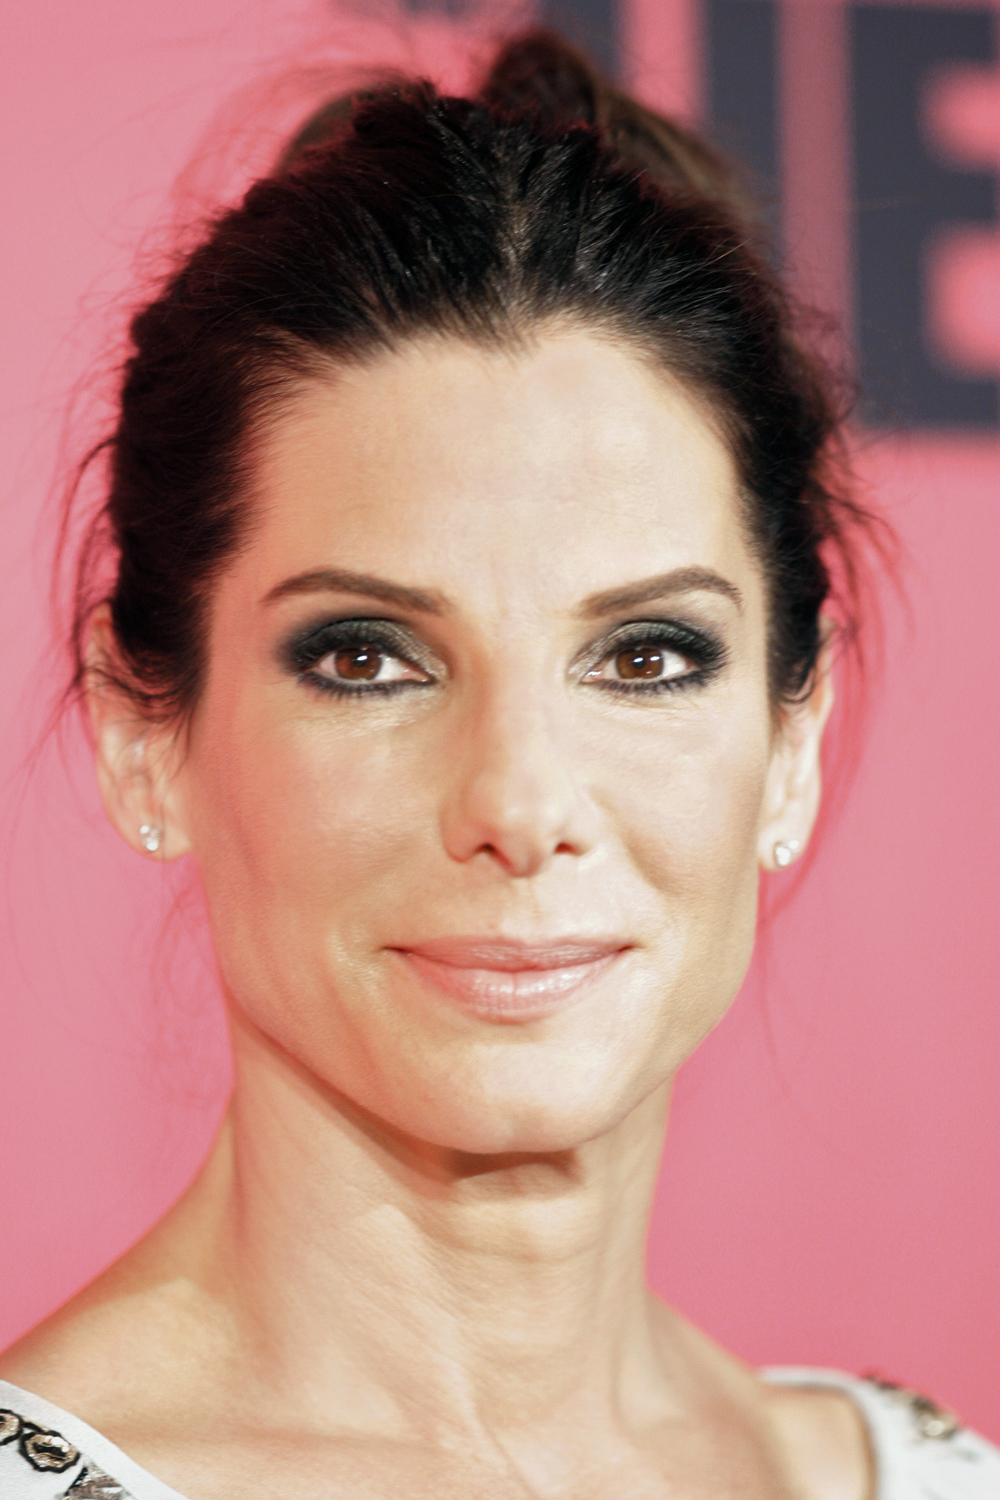 What are some highlights of Sandra Bullock's filmography?